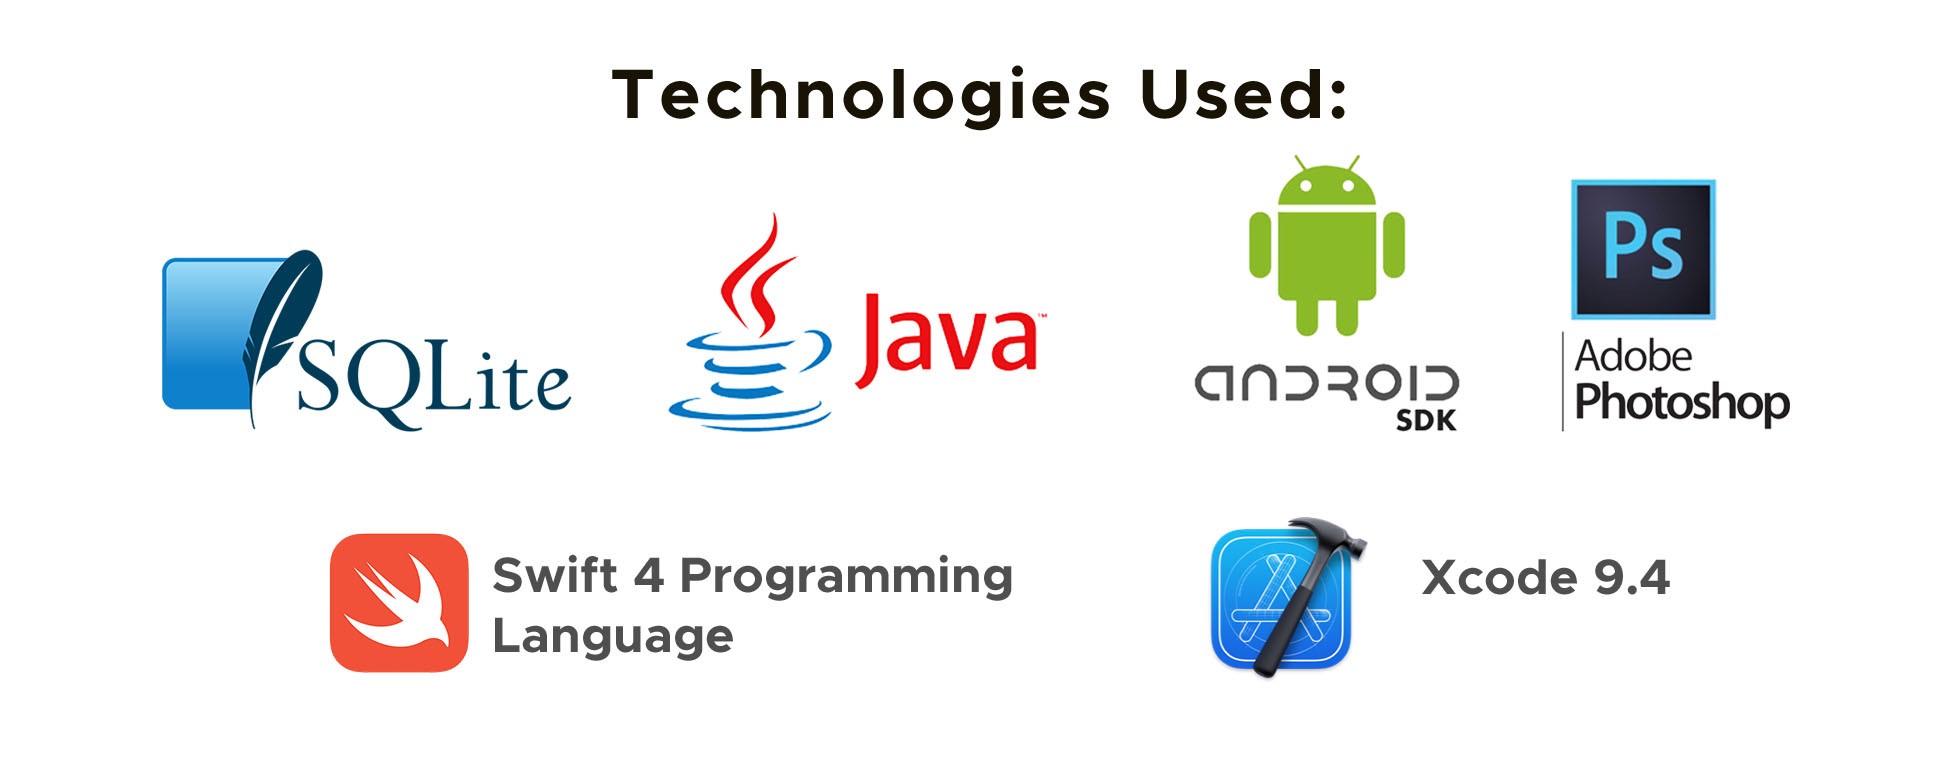 Technologies Used in ZUparr App